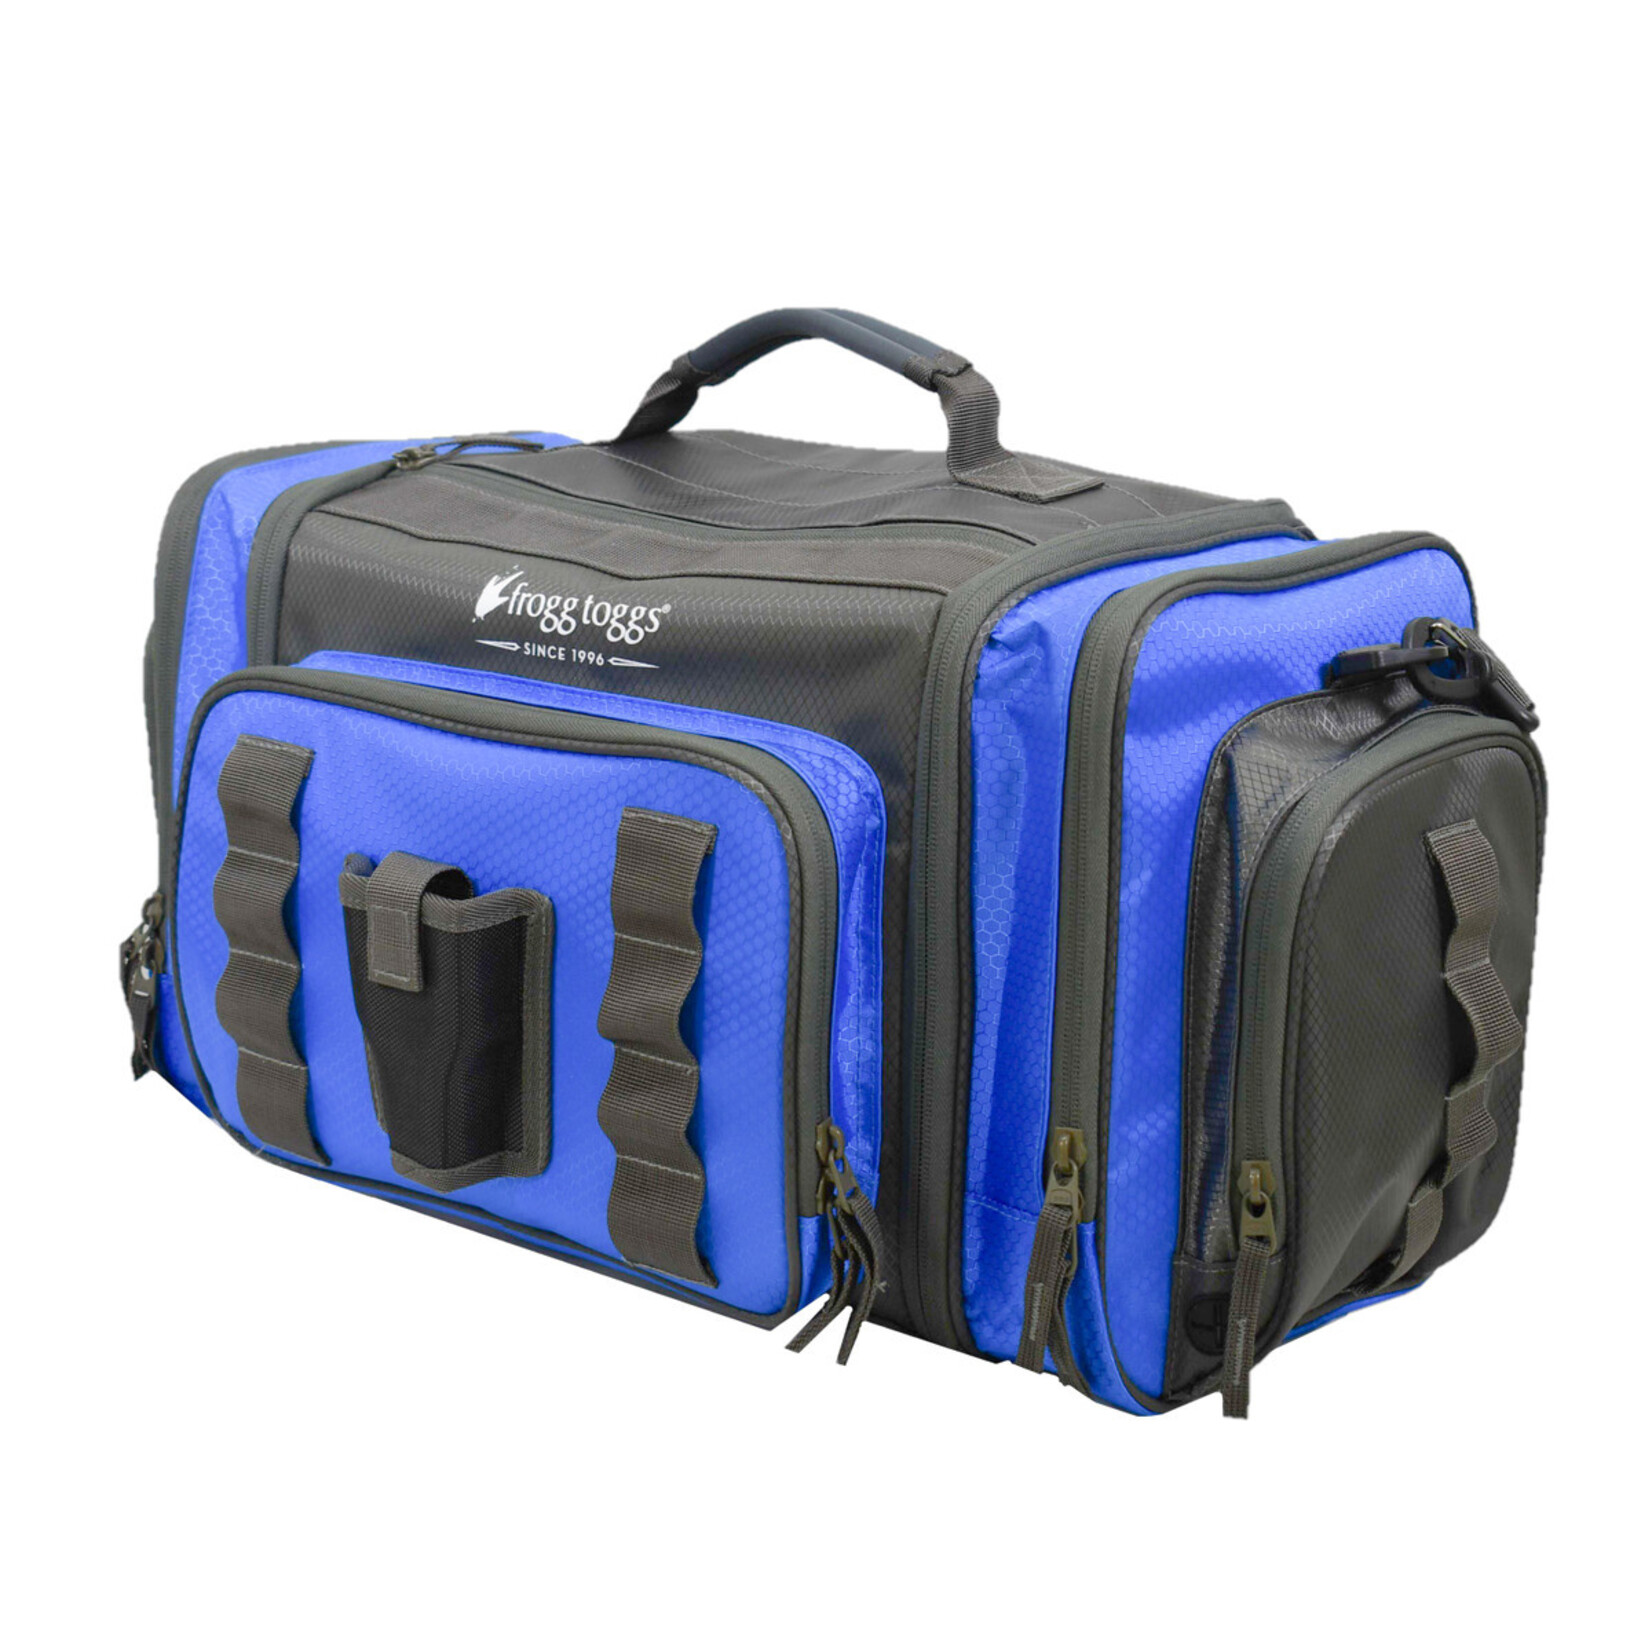 Frog Toggs Frogg Toggs Tackle Bag (Blue)